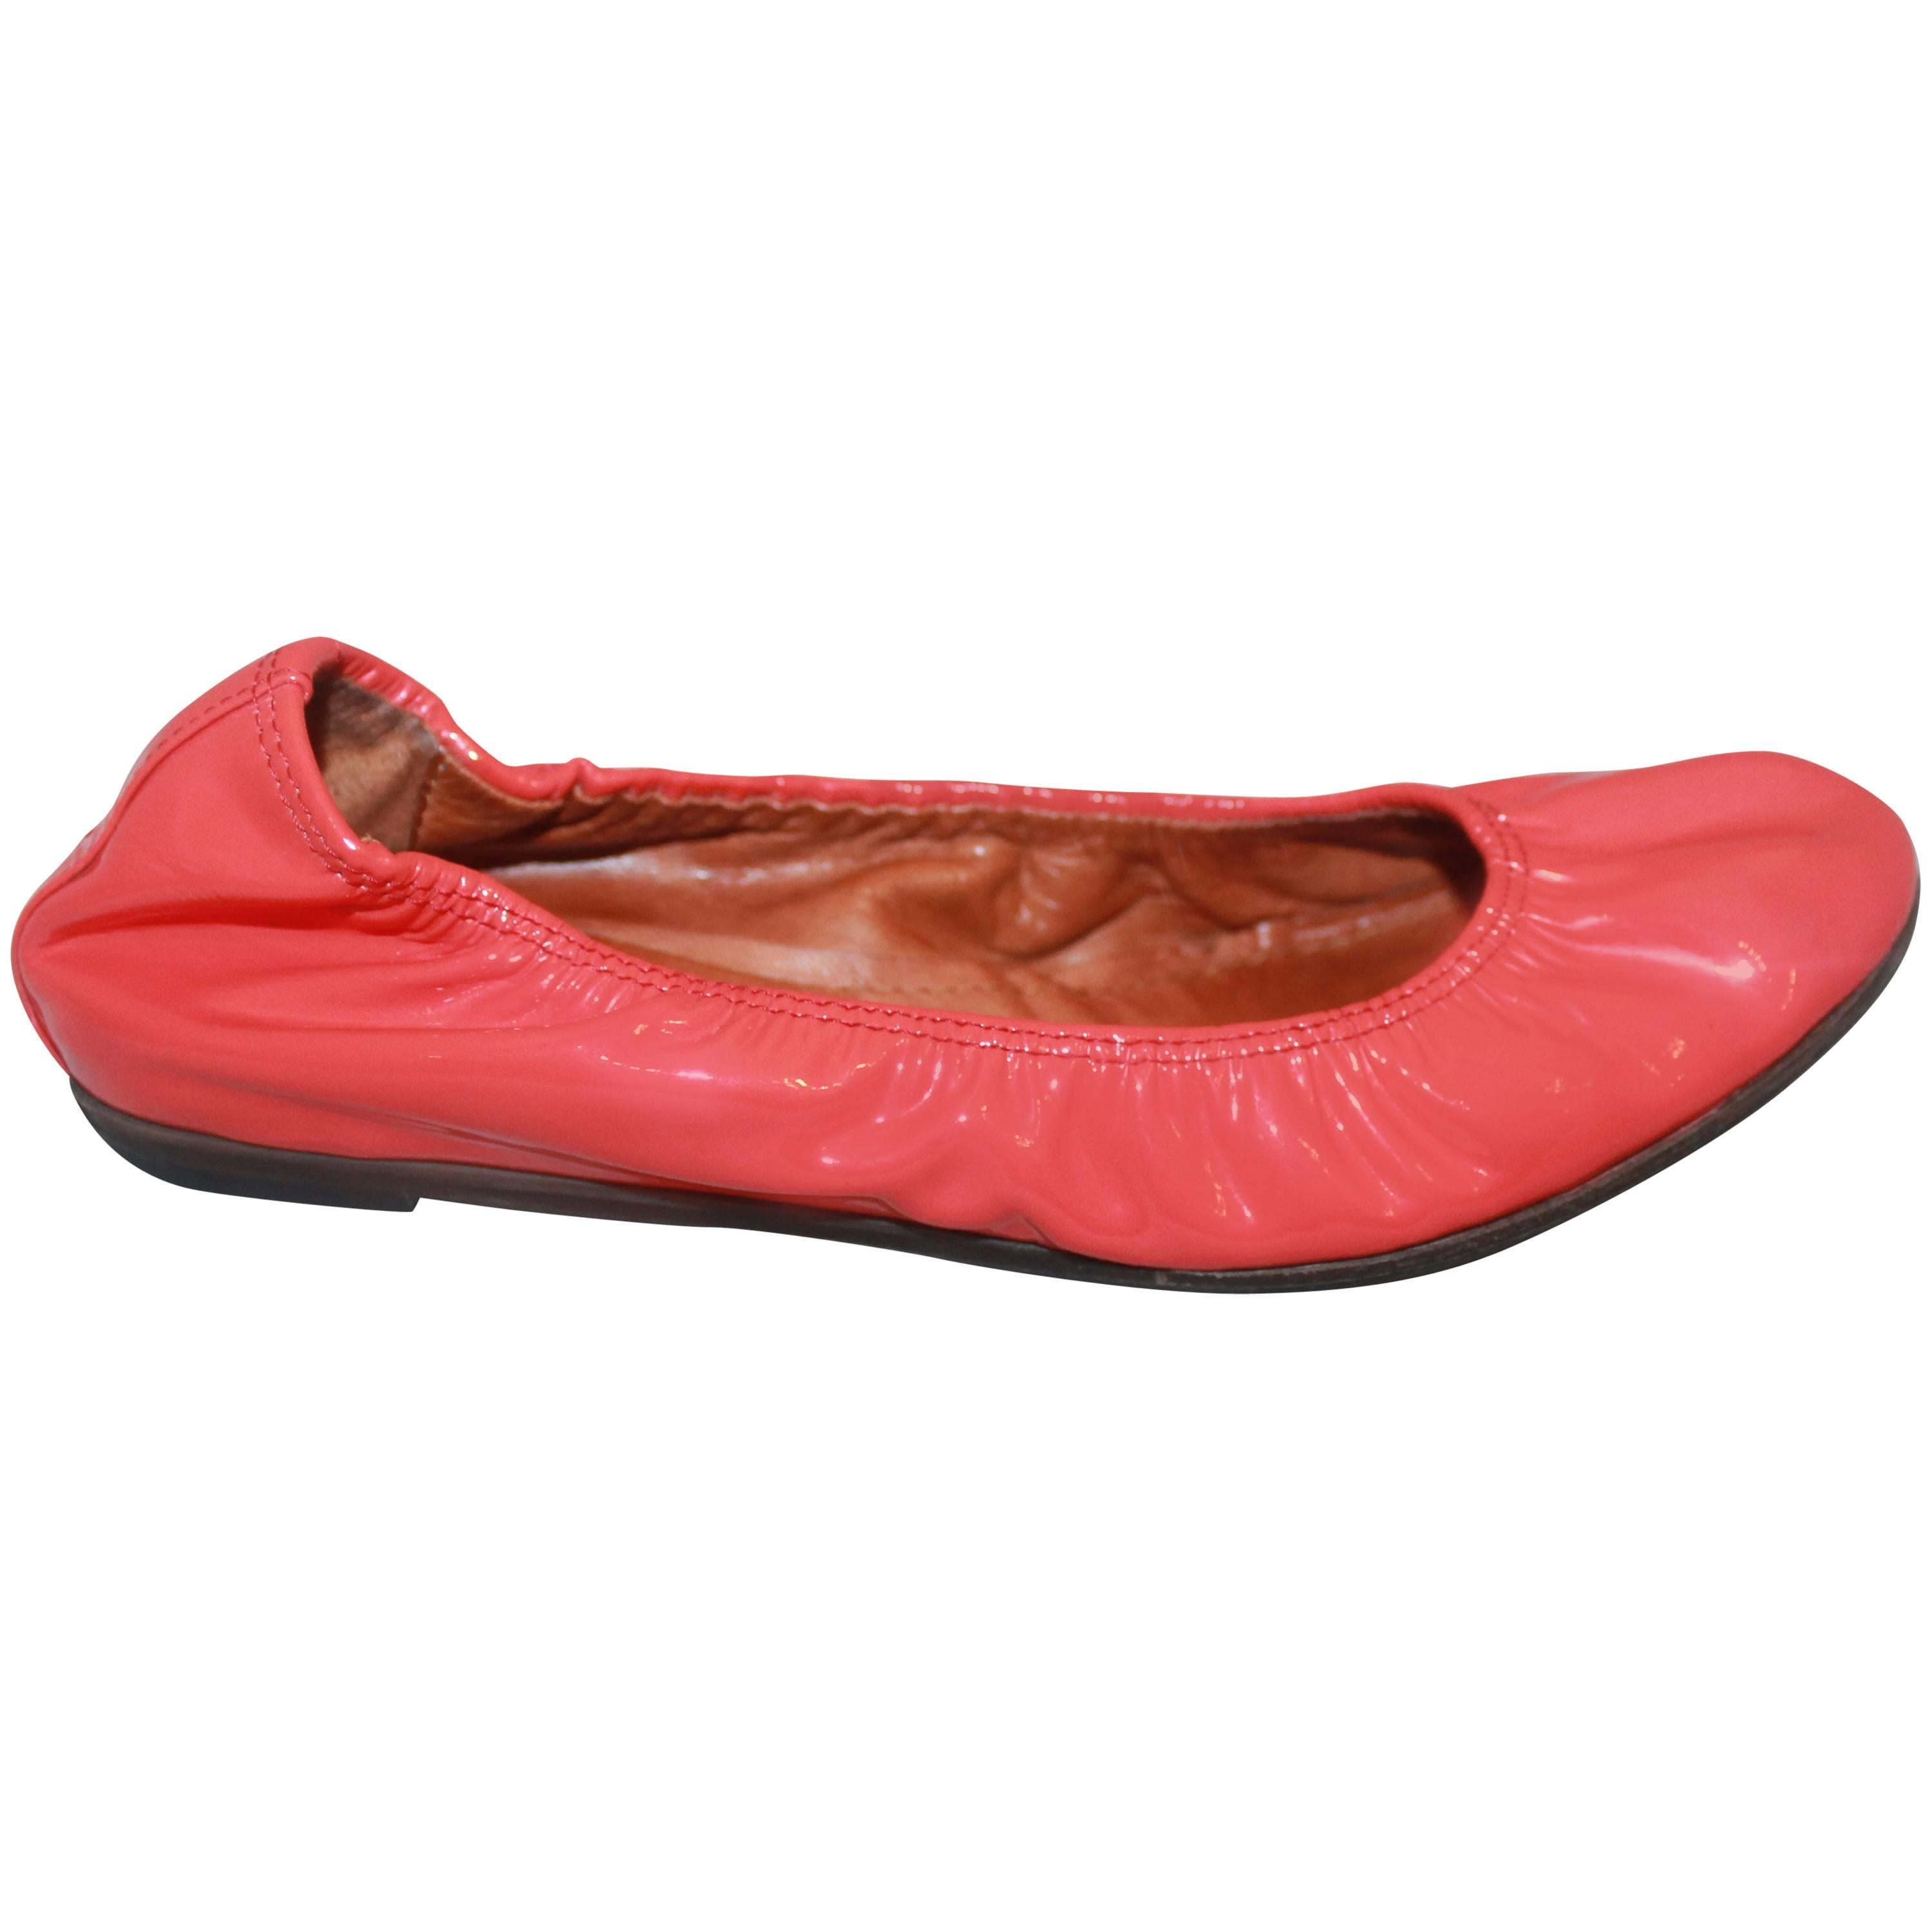 Lanvin Coral Patent Ballet Flats w/ Interior Leather Lining - 8